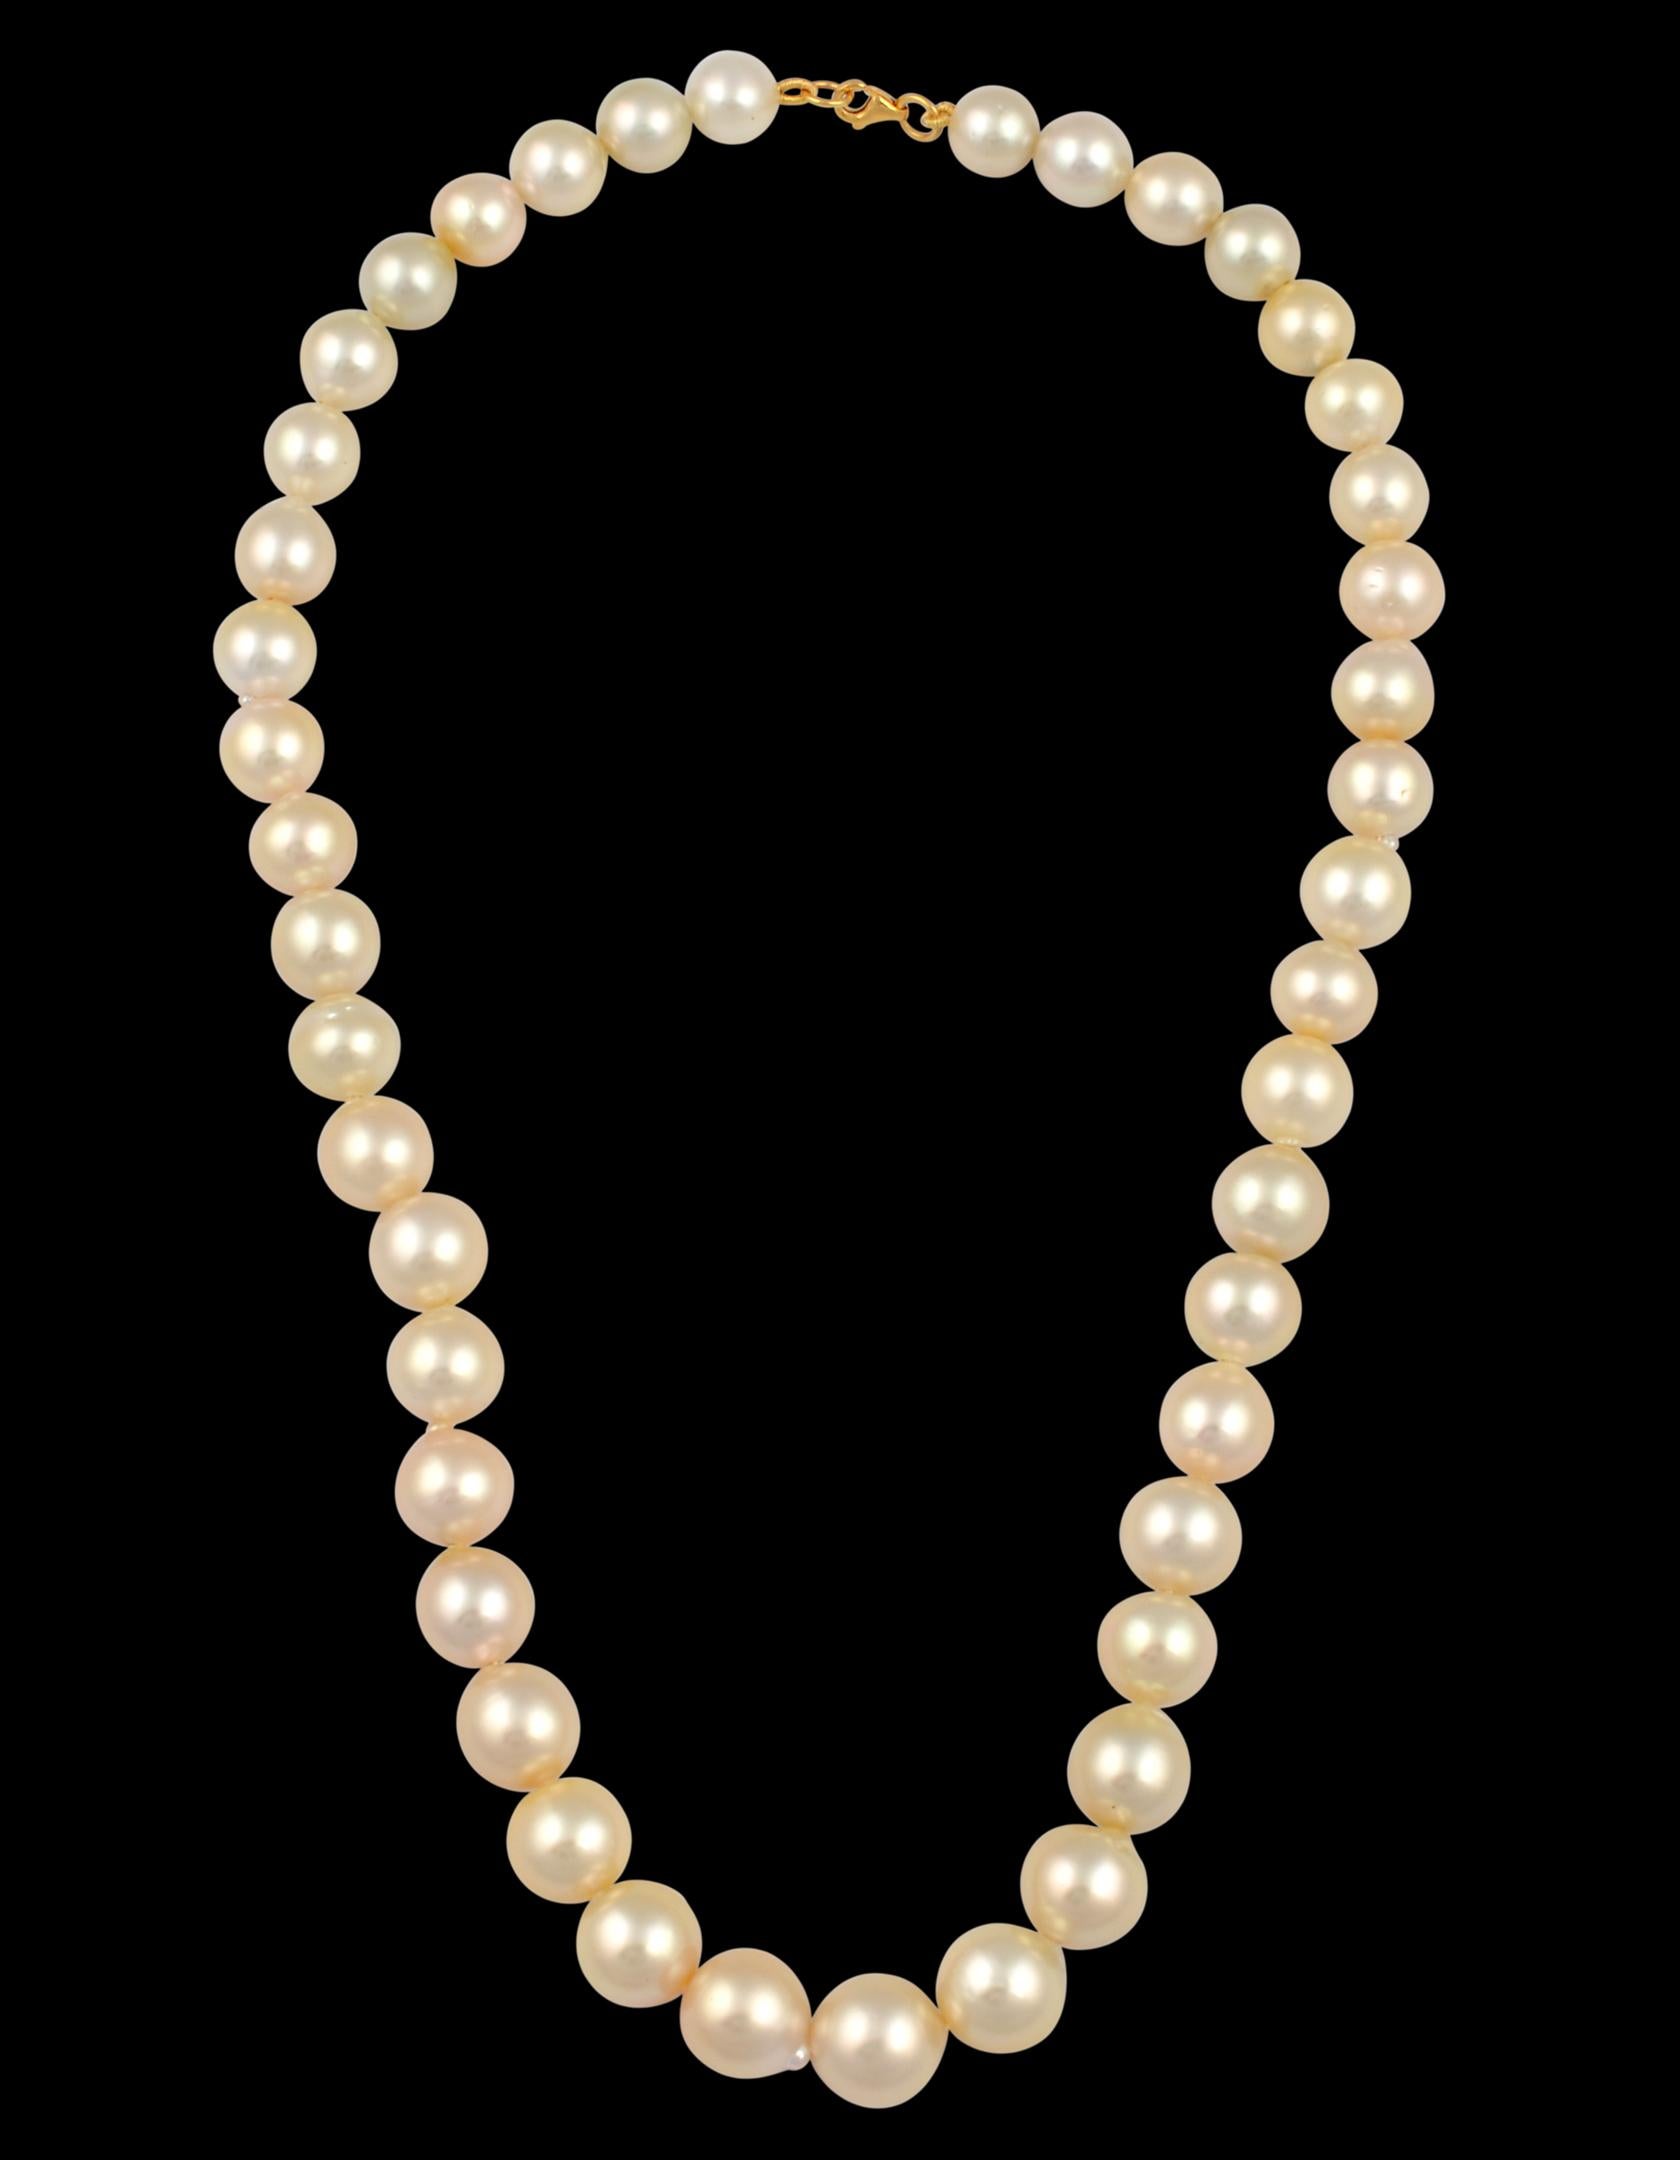 Graduating Cream Color South Sea Pearls Necklace 14 Karat Yellow Gold Clasp For Sale 1